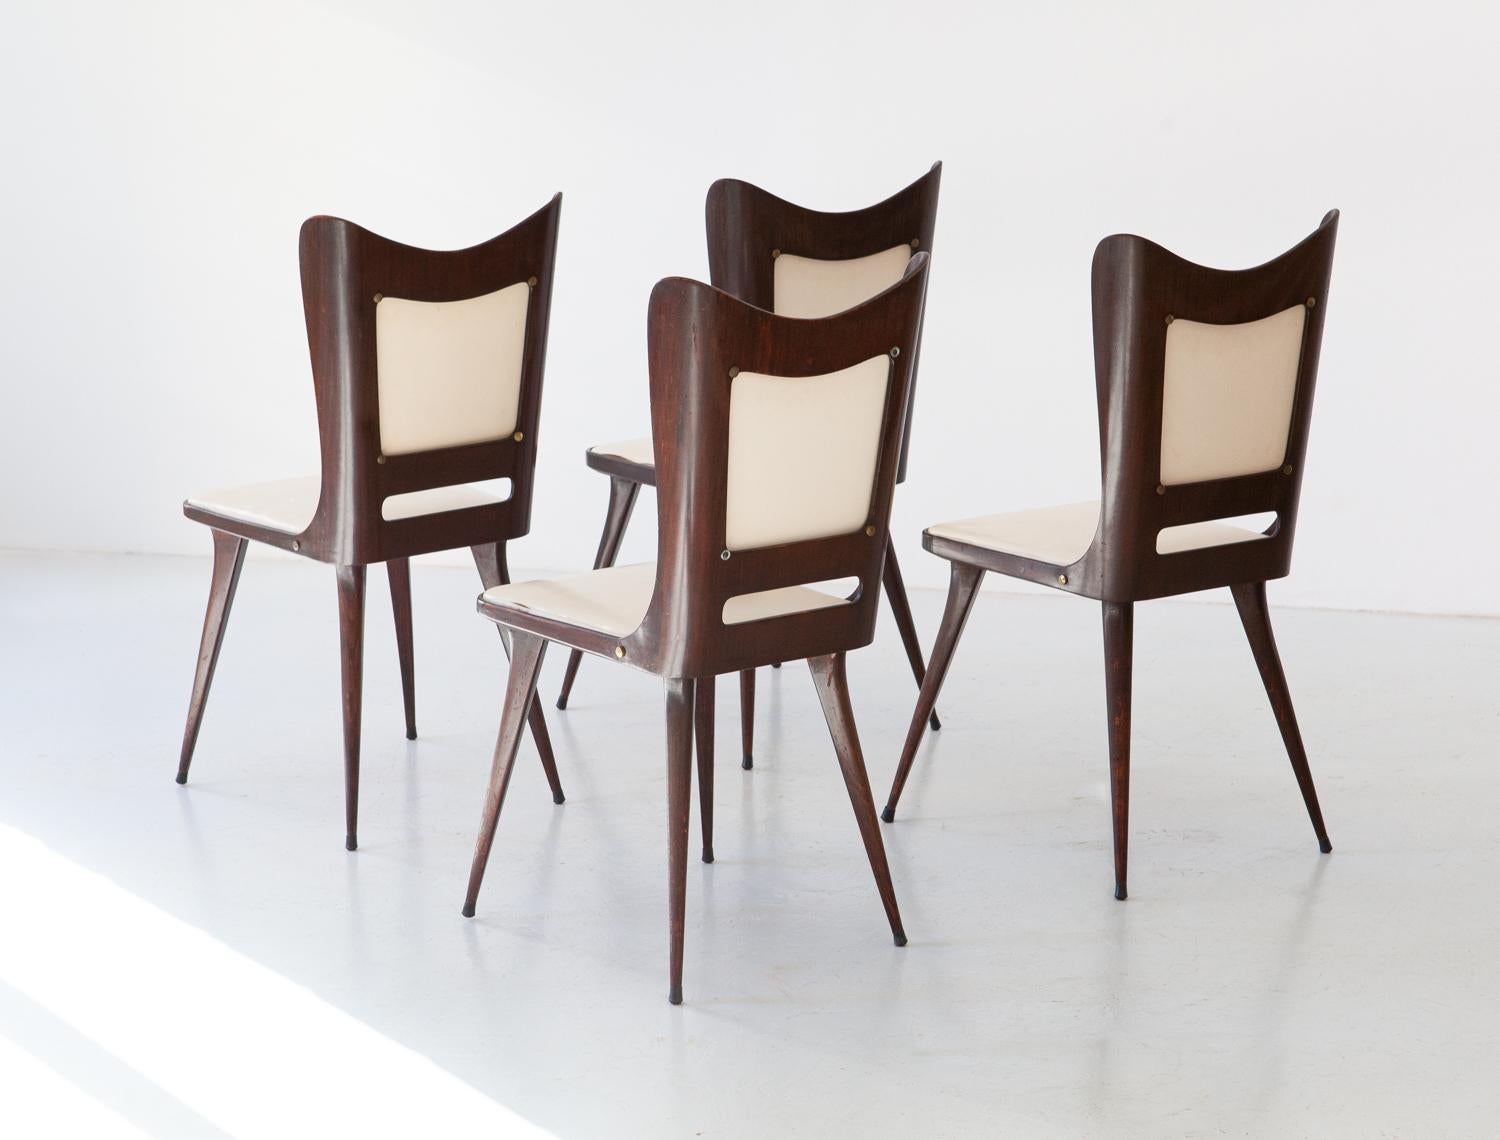 Mid-20th Century Set of Four Italian Beige Skai and Wood Dining Chairs, 1950s For Sale